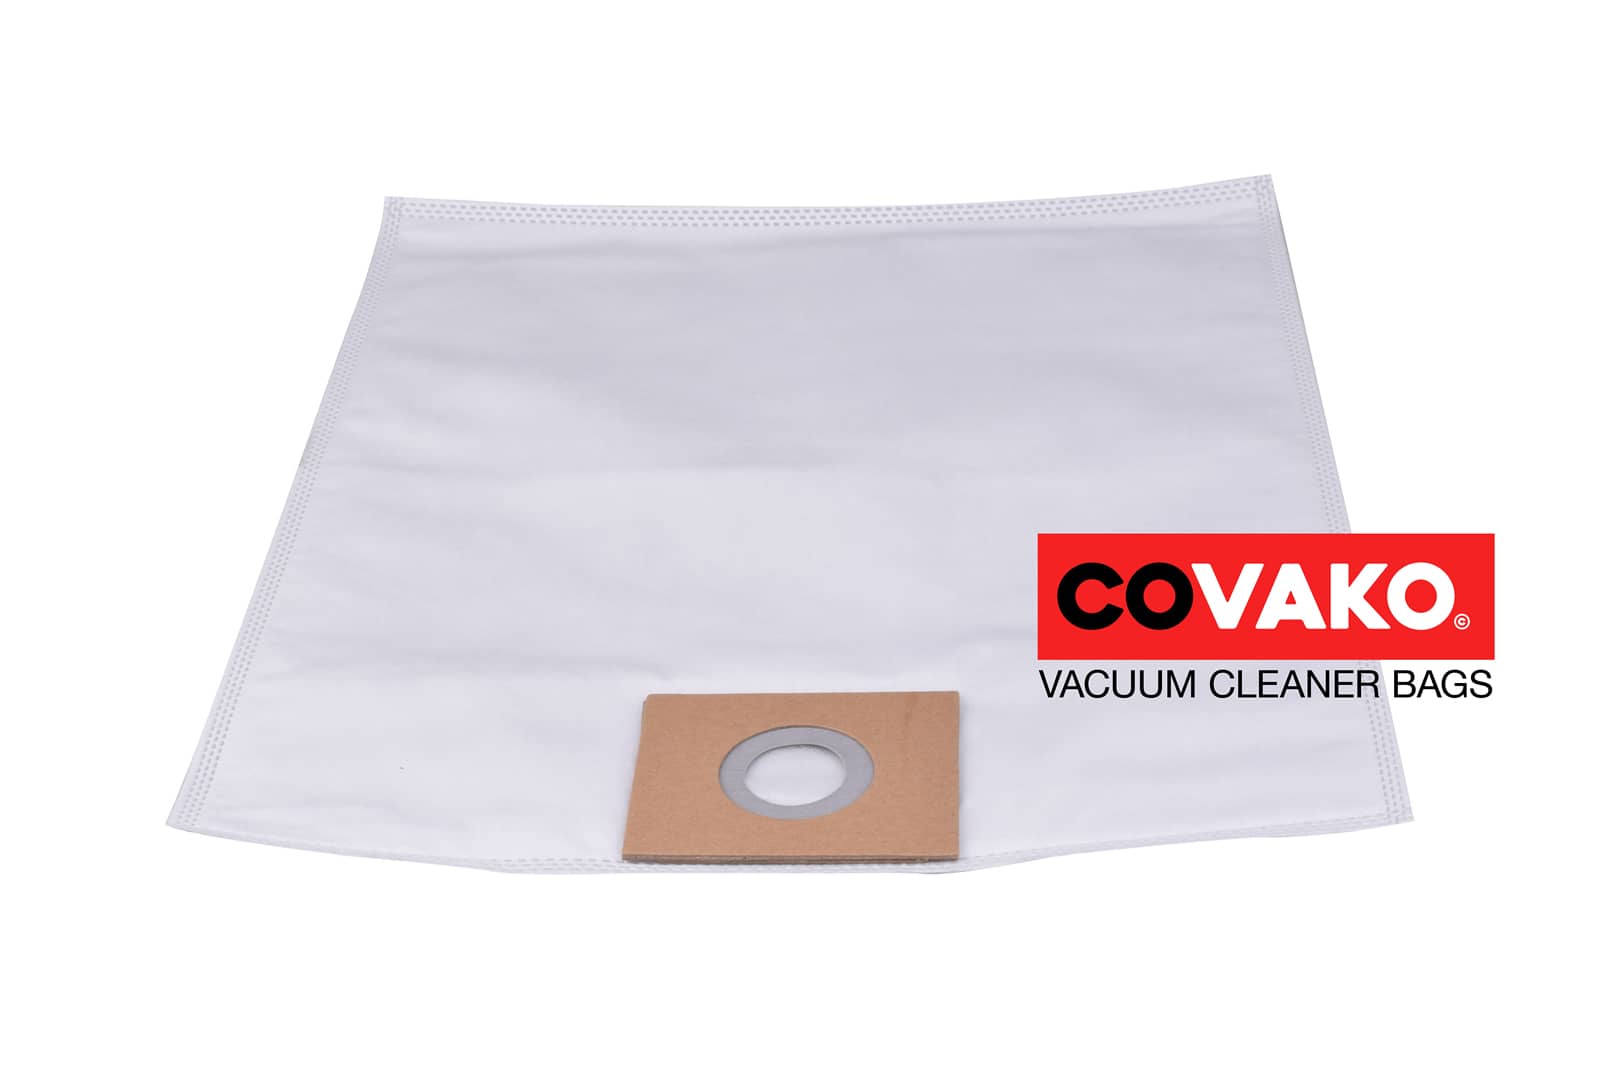 Fimap 223309 / Synthesis - Fimap vacuum cleaner bags